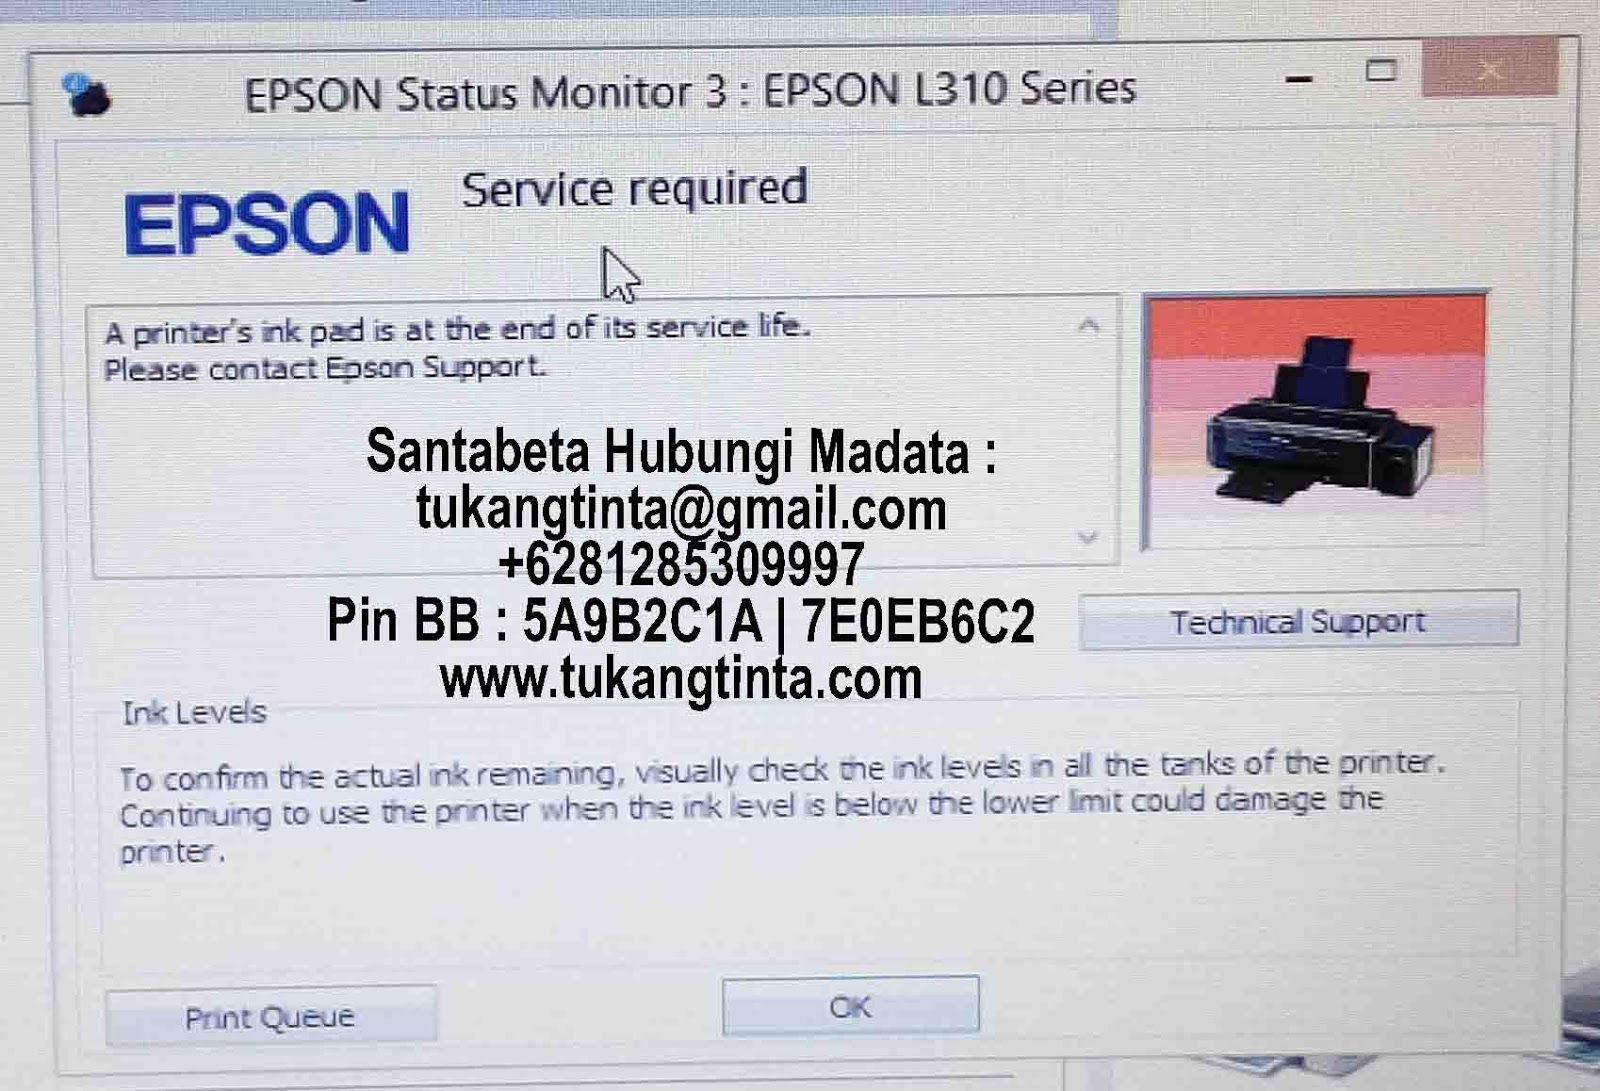 Canon g2415 ошибка p07. Canon mp280 ошибка p08. The Printer's Ink Pads are at the end of their service Life. Please contact Epson support. Что делать.